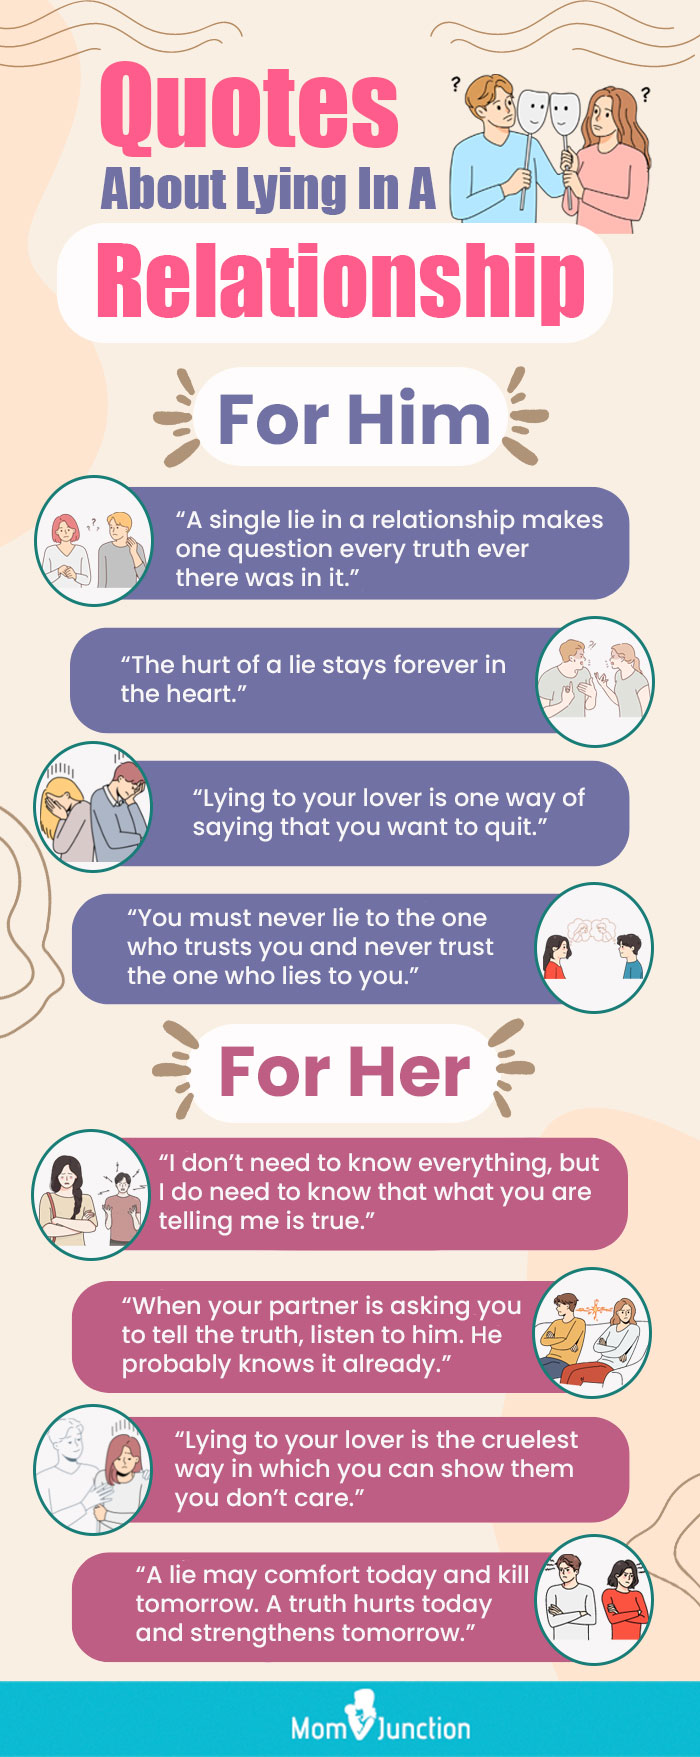 quotes about lying in a relationship (infographic)